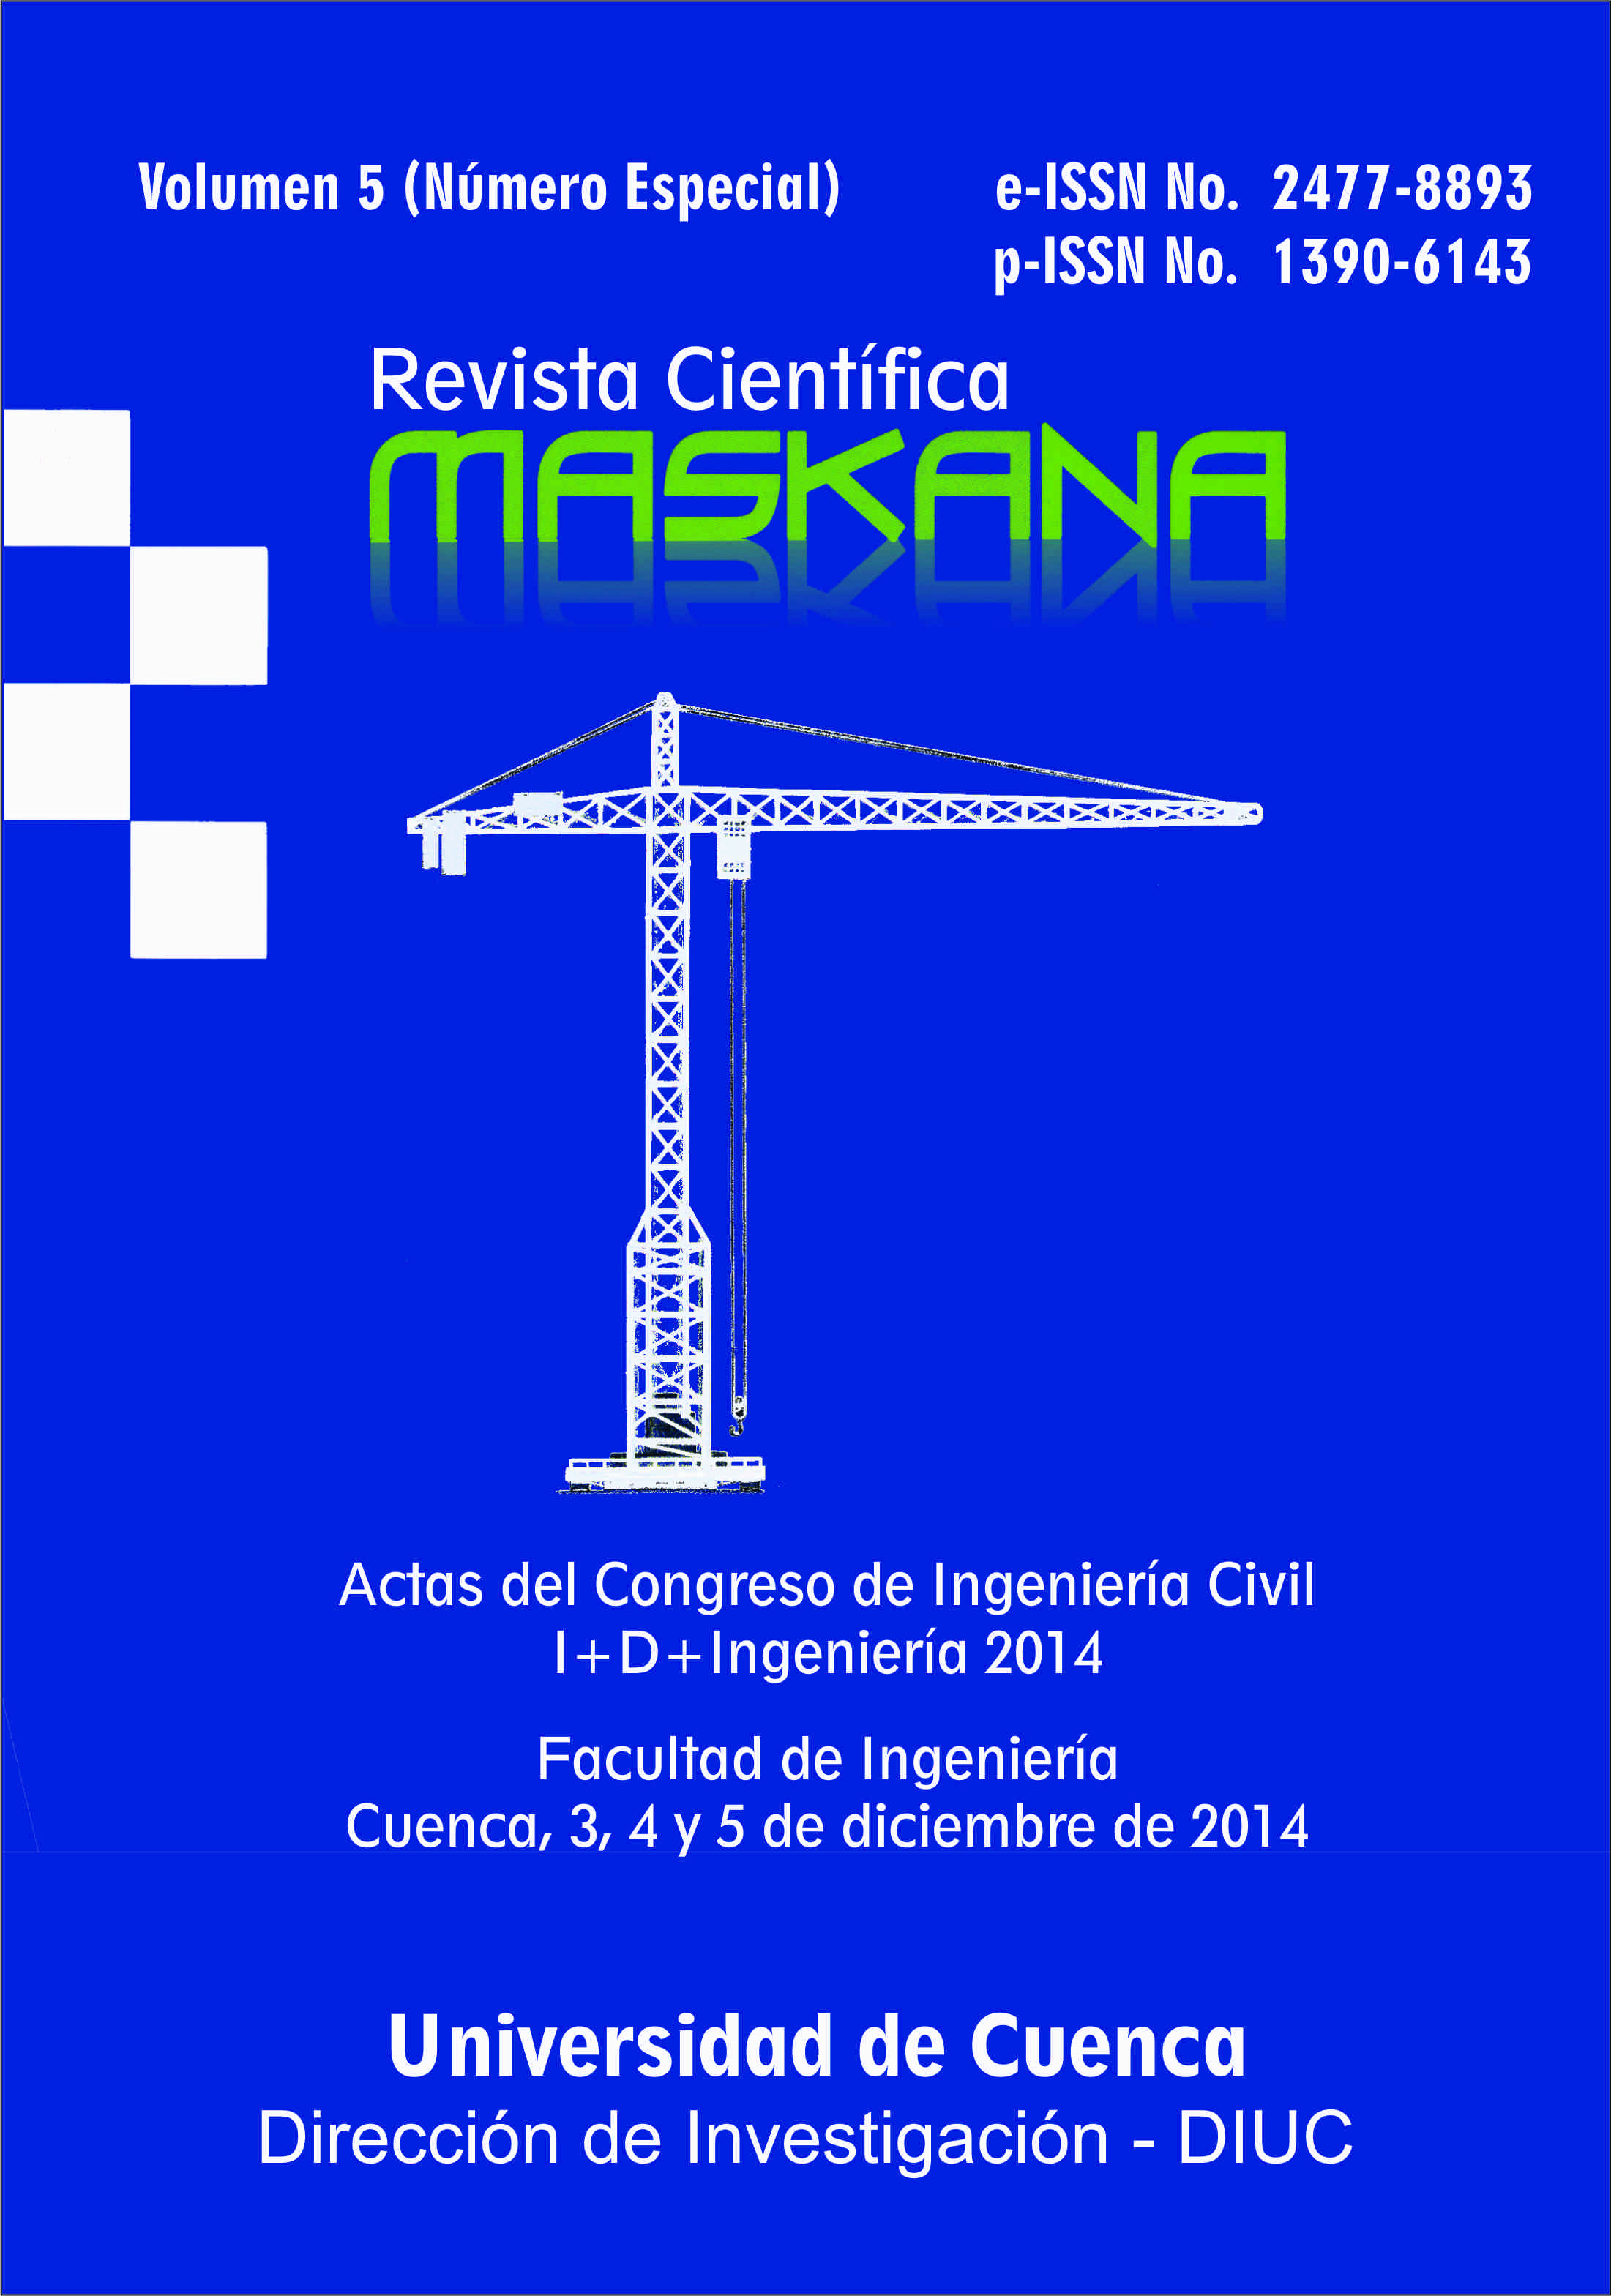 					View Vol. 5 (2014): Proceedings of the Congress of Civil Engineering, as part of the R&D+Engineering 2014 Congress
				